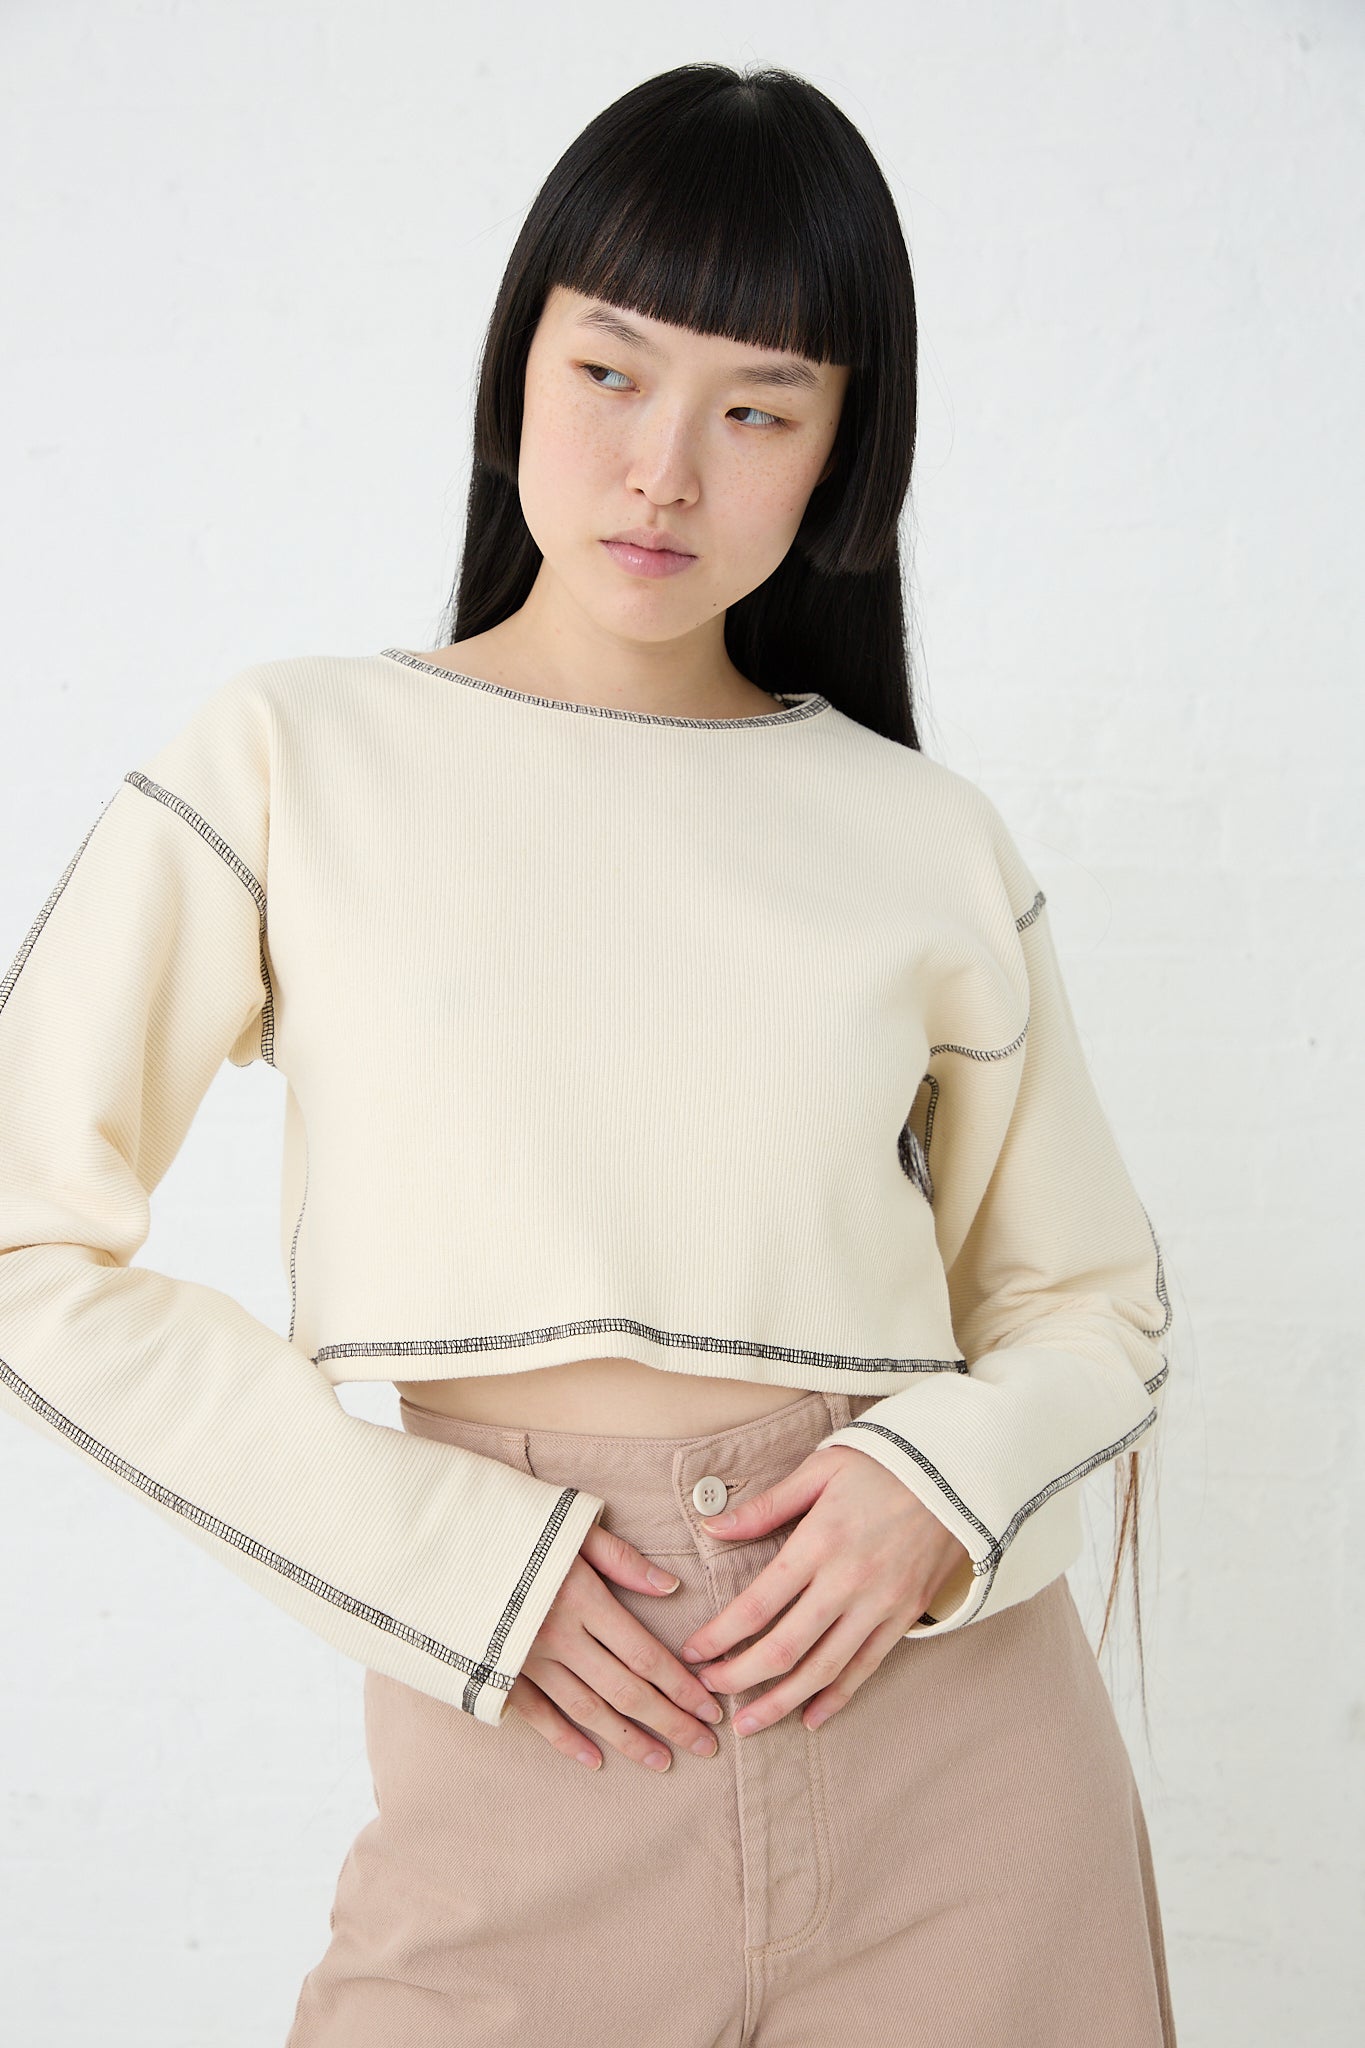 A model wearing a Cotton Hemp Rib Garble Top in Undyed, sustainably produced by Baserange, paired with pink pants. Front view.